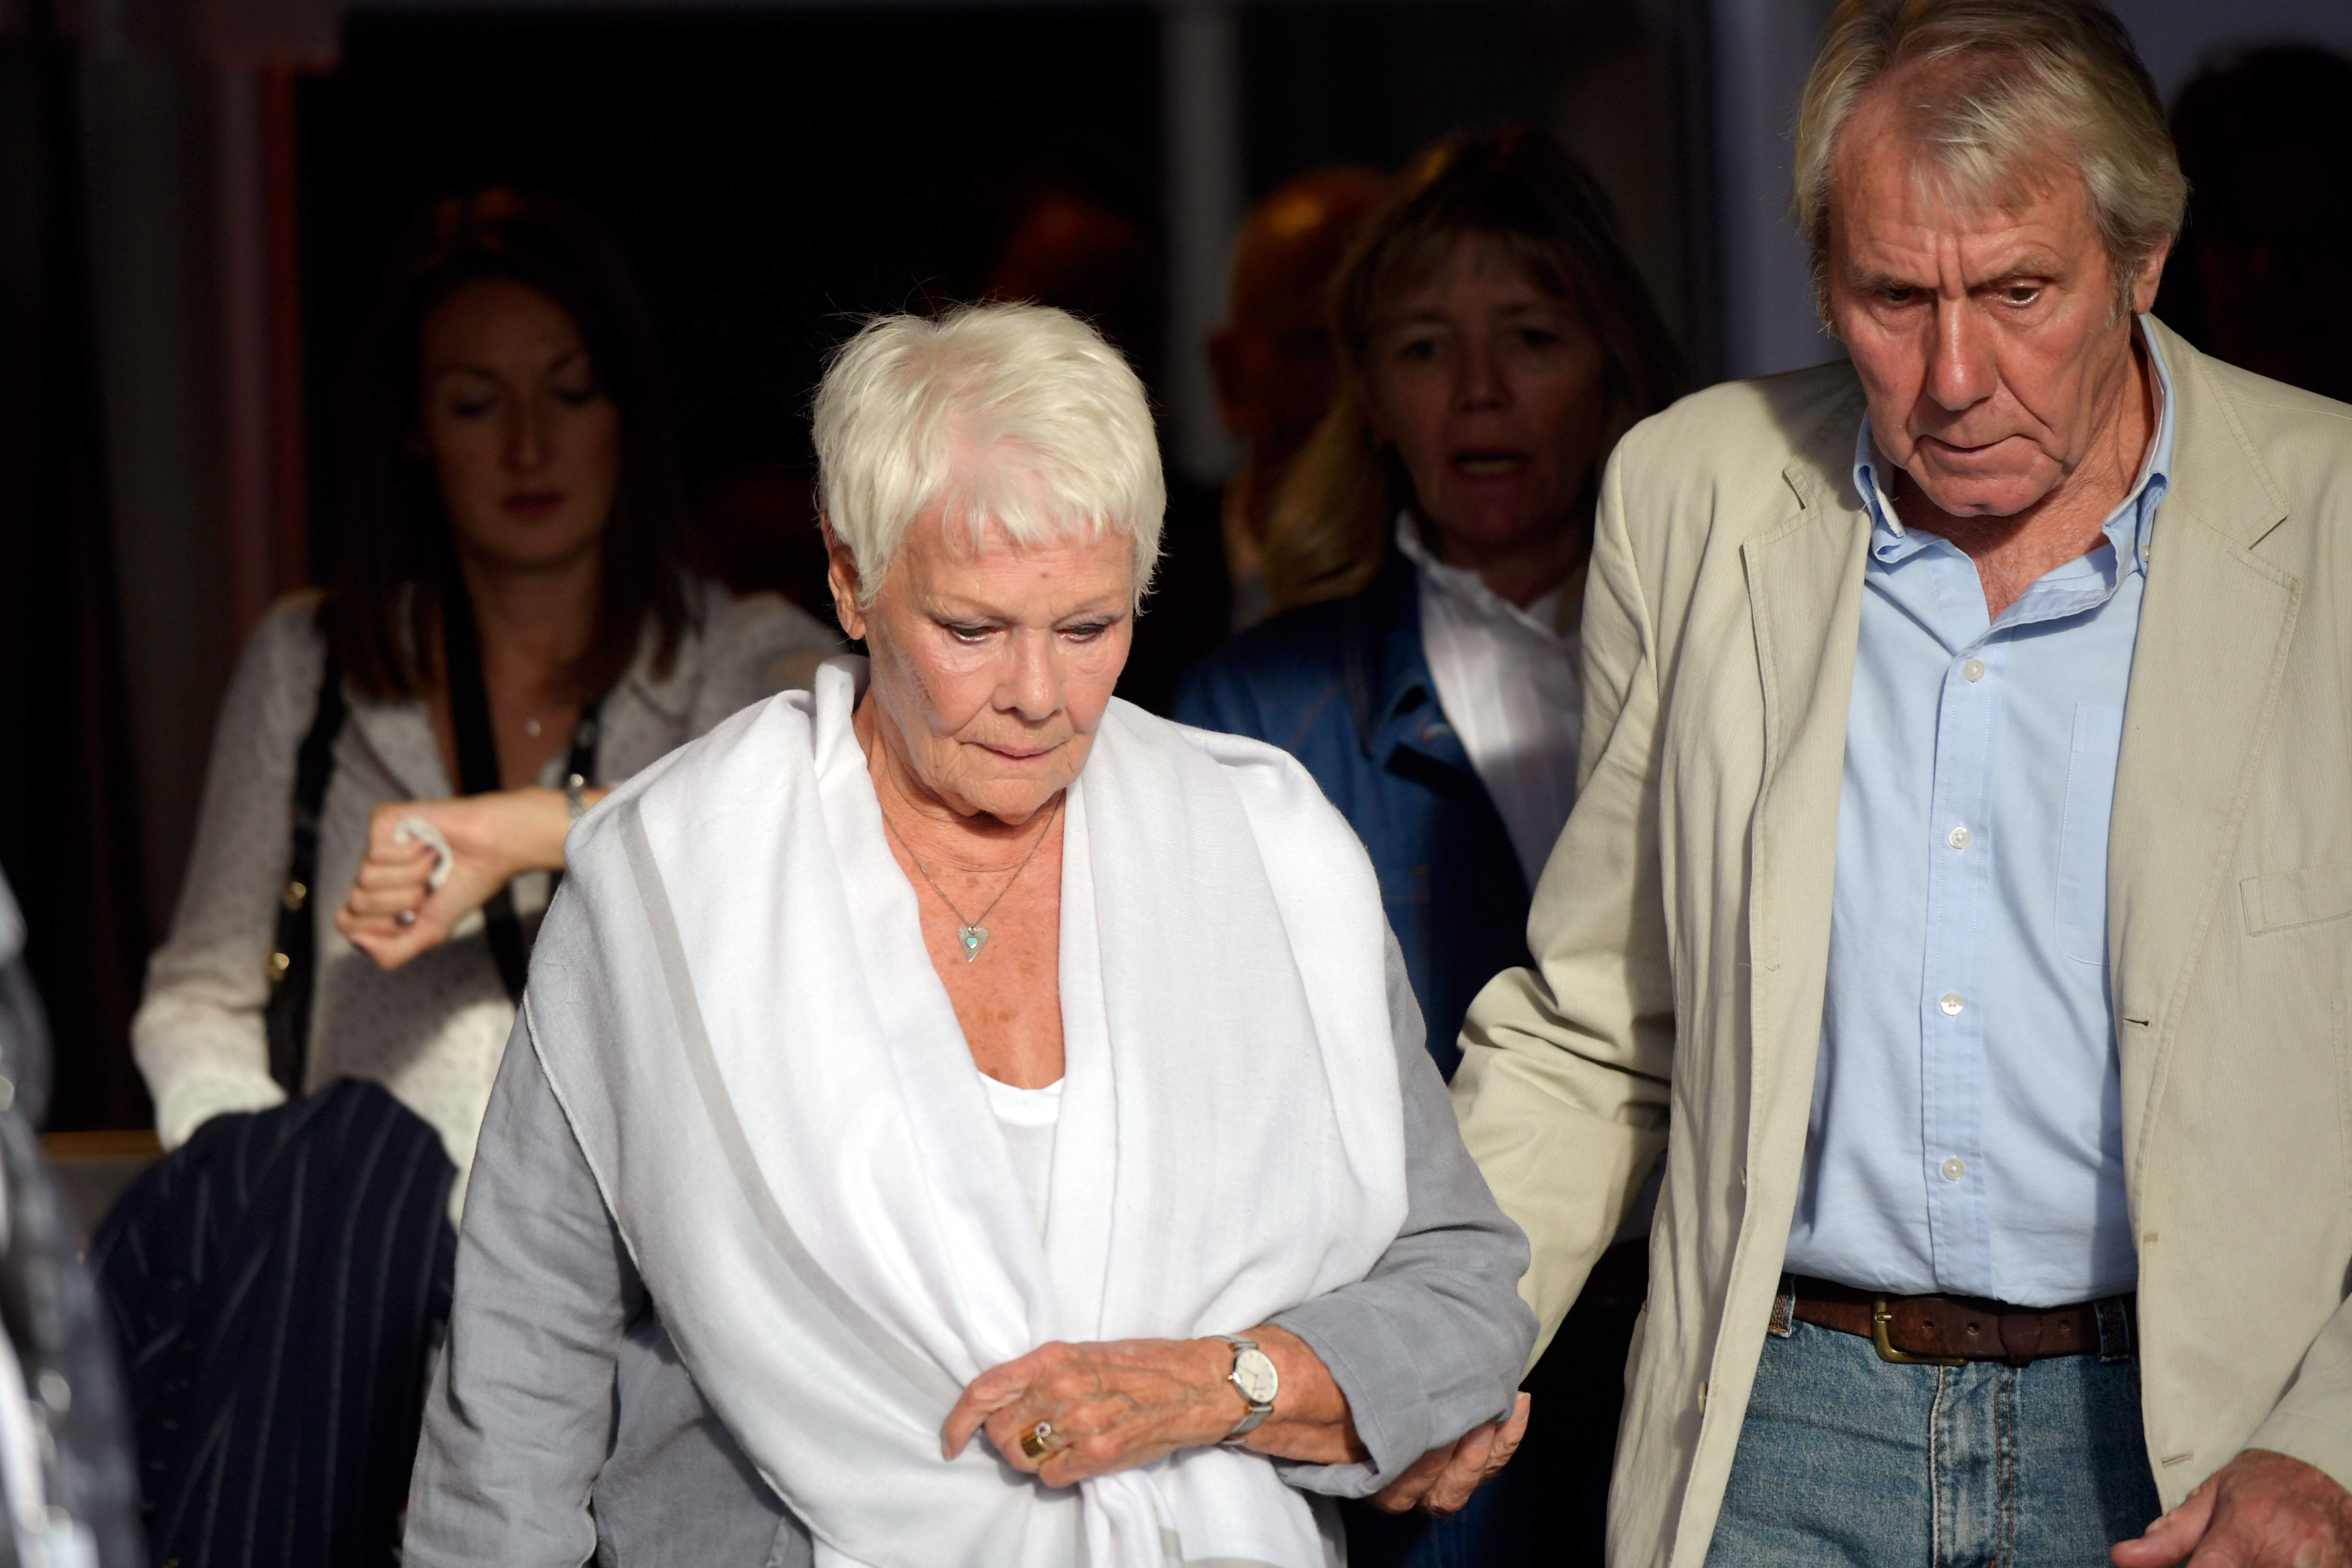 Judi Dench and David Mills leave after the 'Red Joan' press conference during the 14th Zurich Film Festival on October 03, 2018 in Zurich, Switzerland. | Source: Getty Images